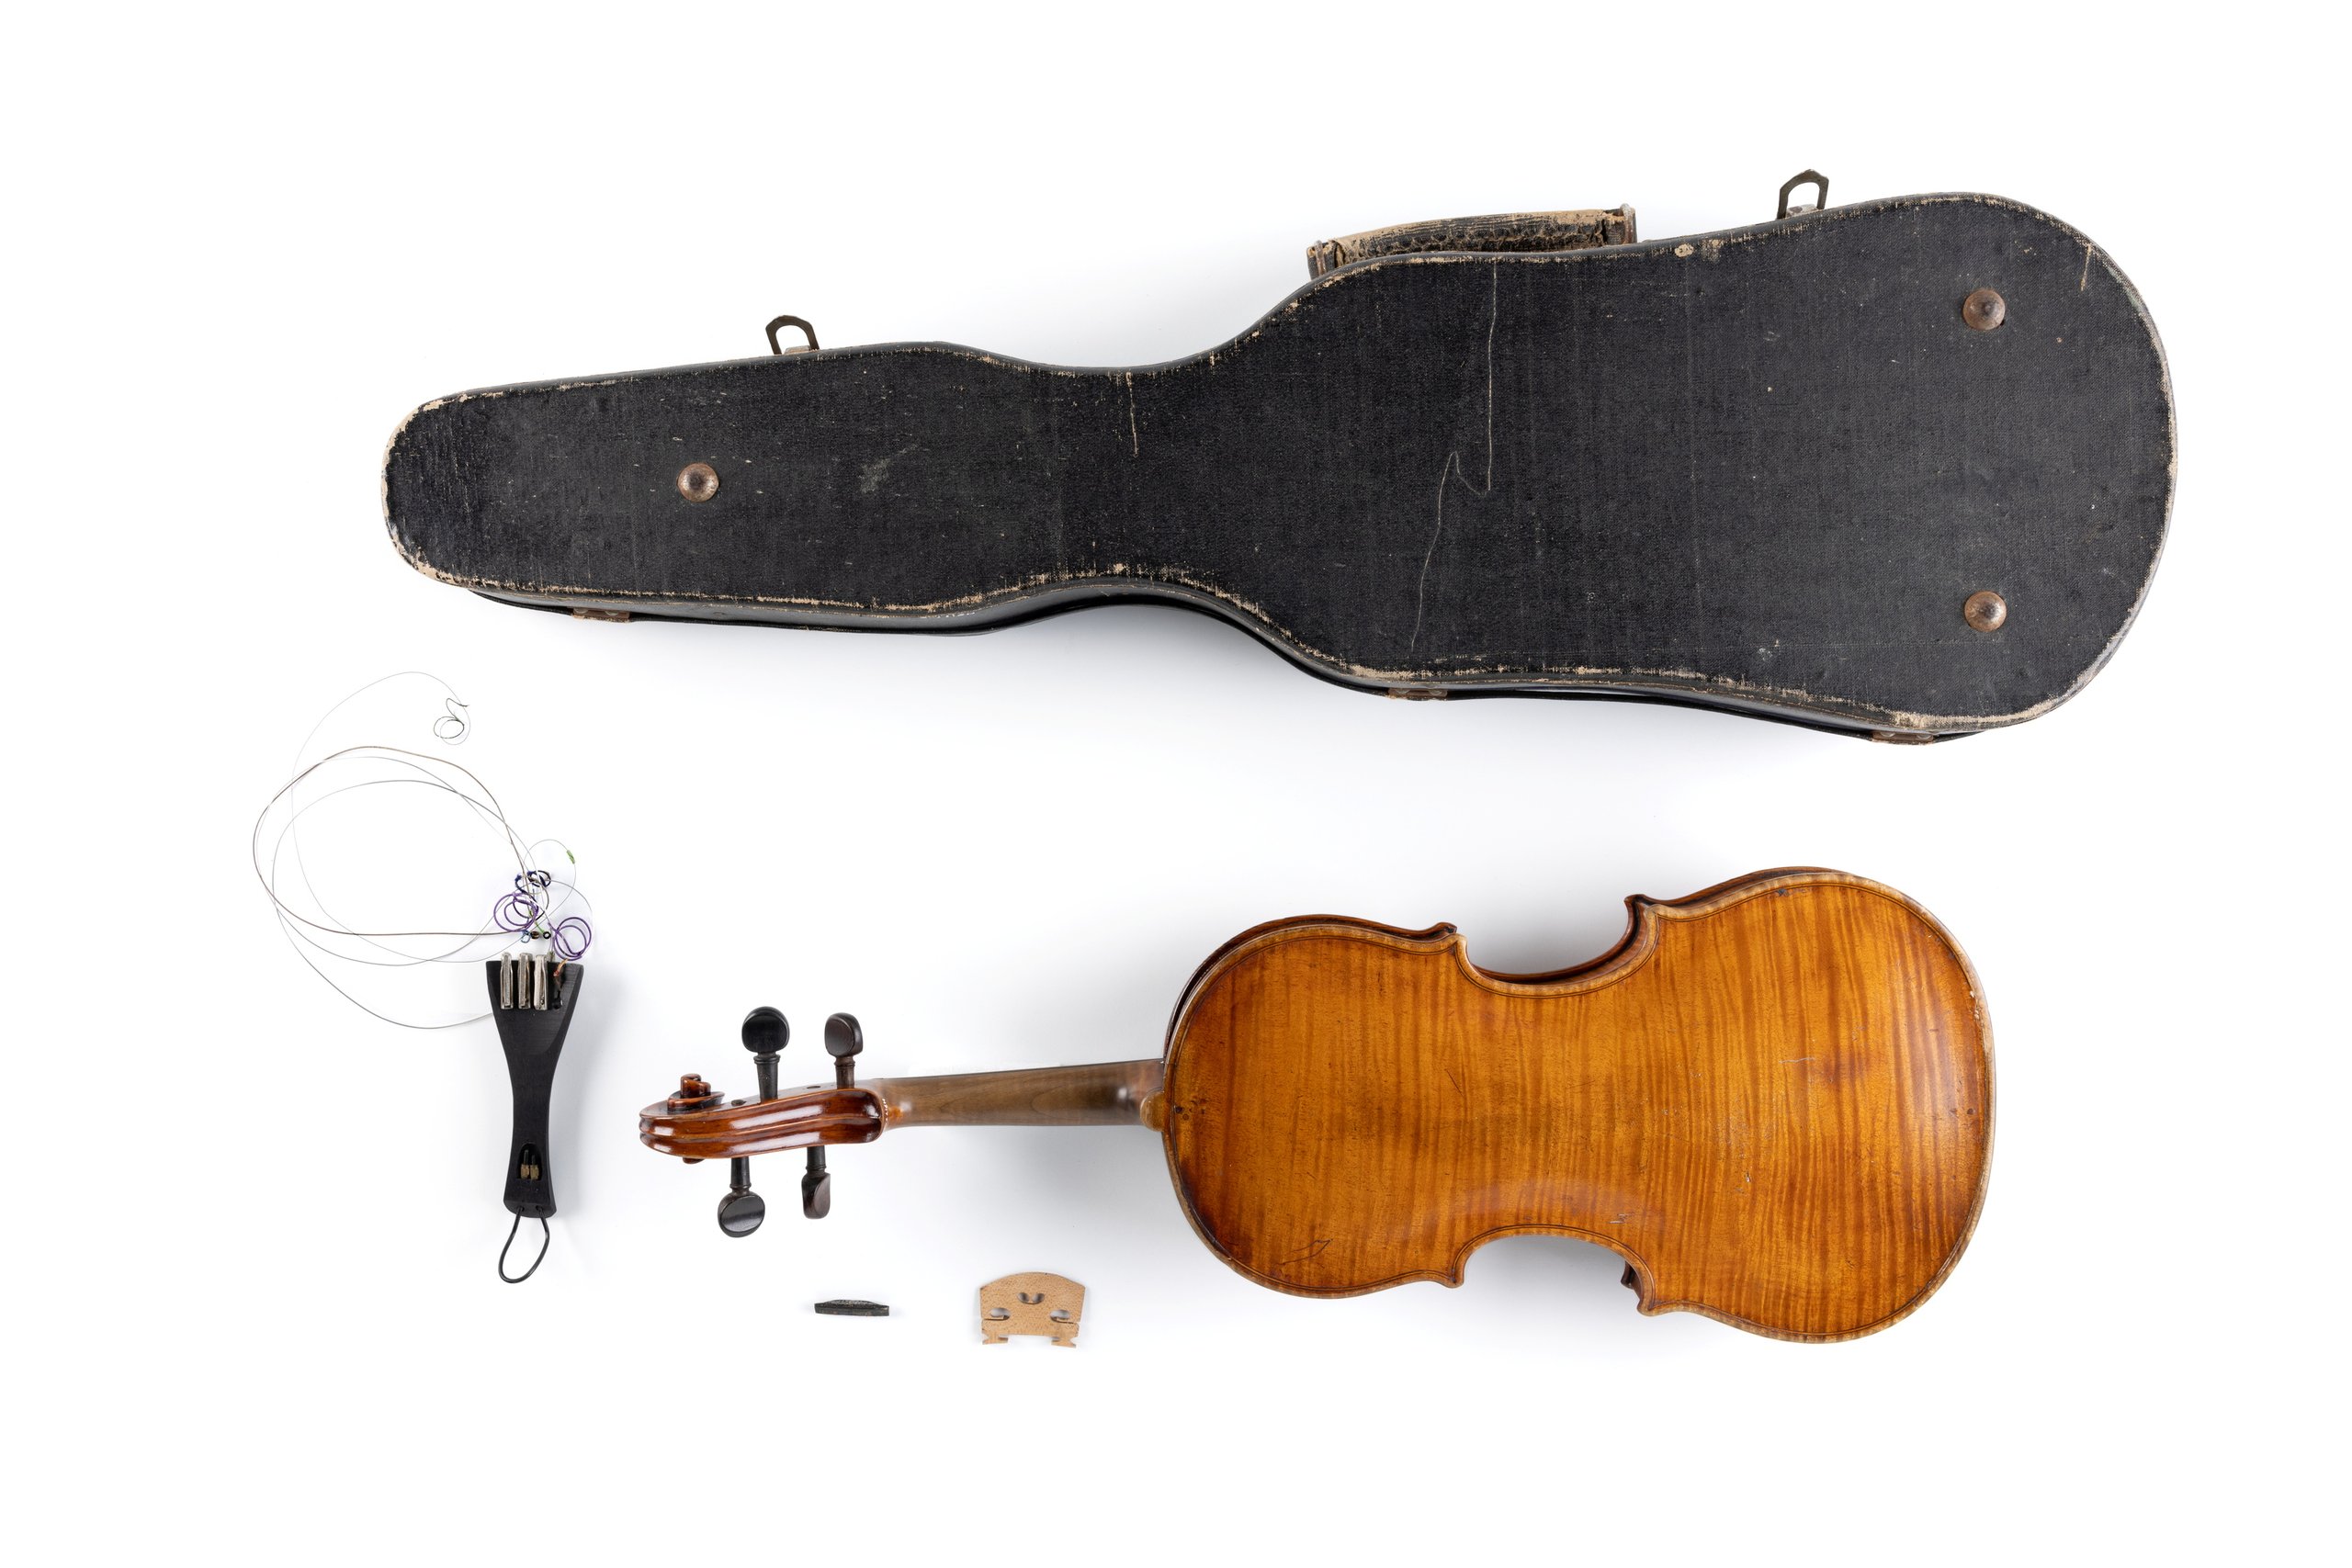 Violin and components in case made by John Devereux